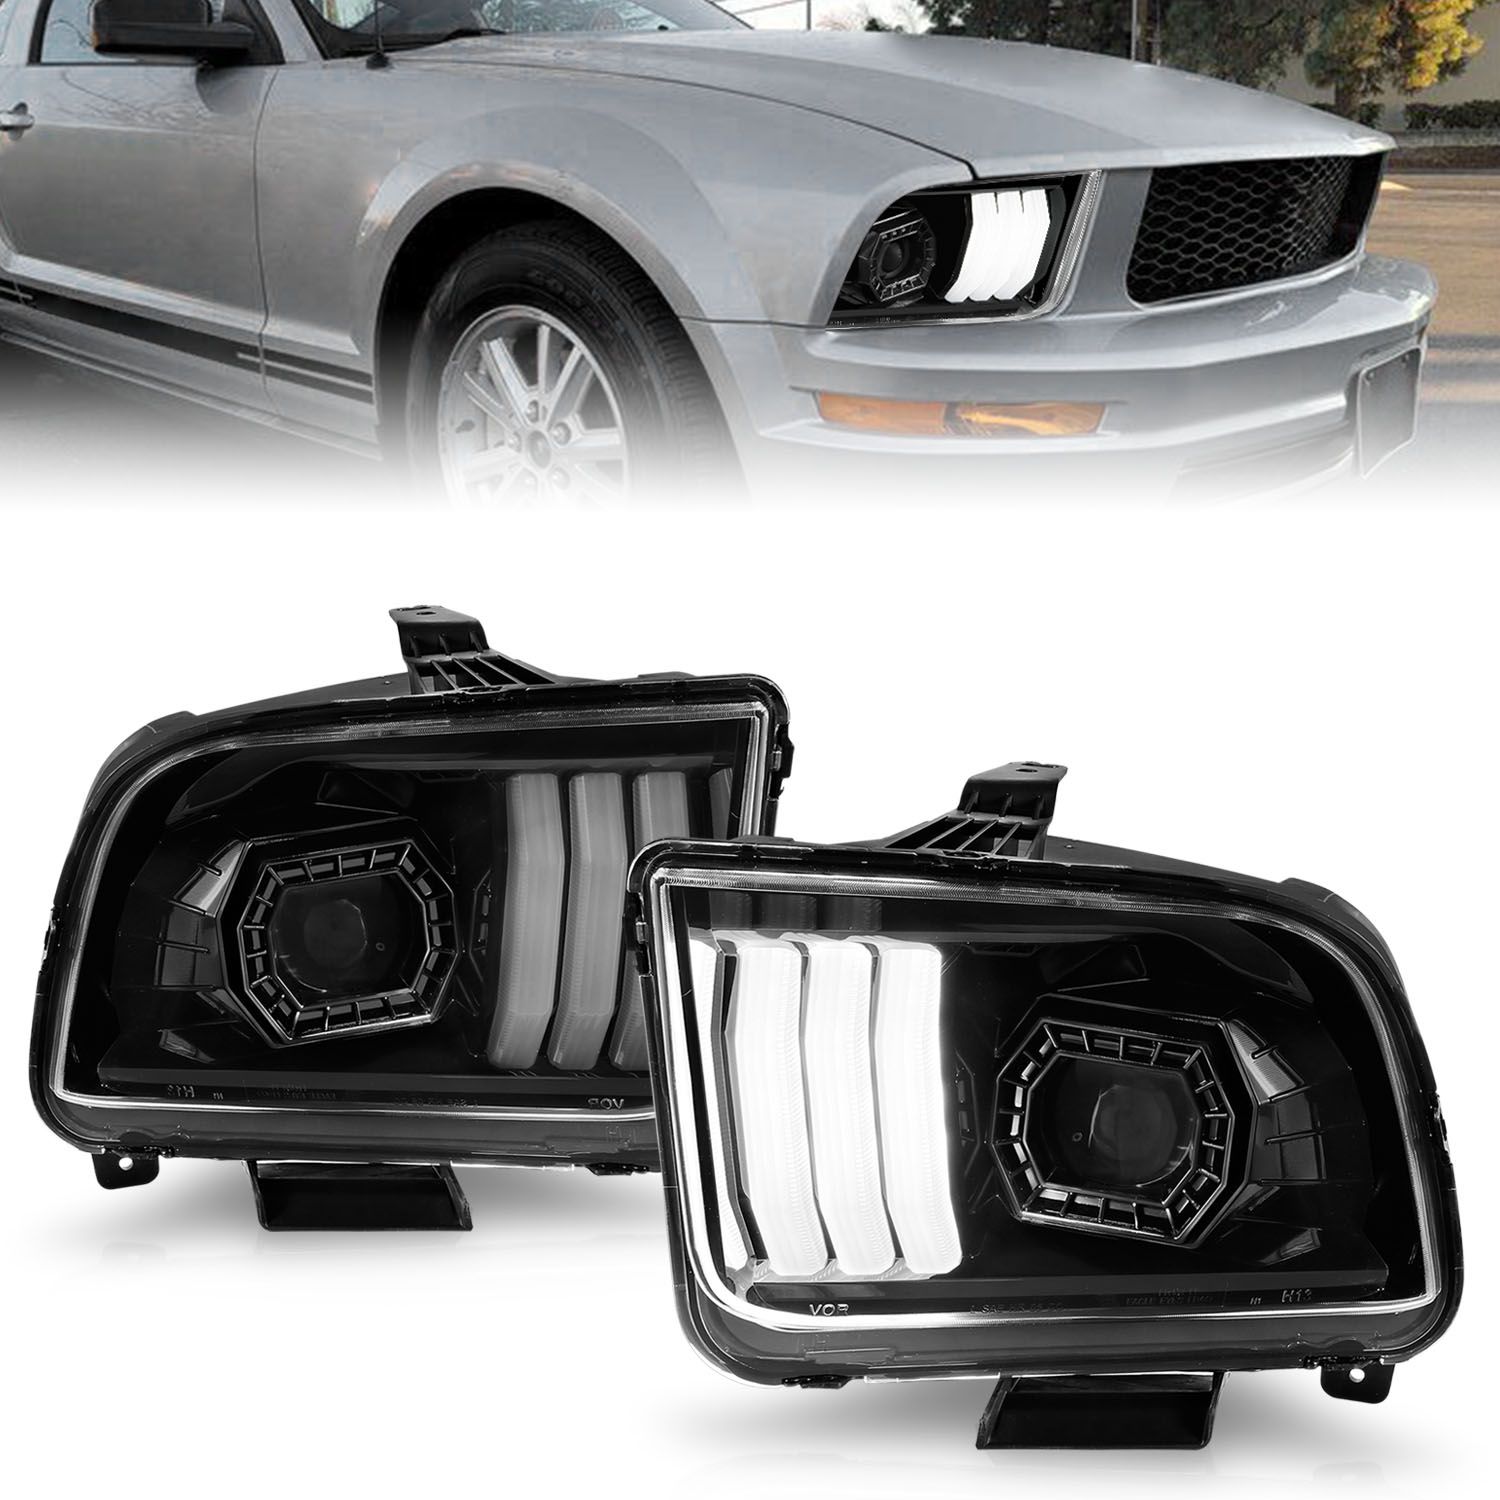 2005-2009 FORD MUSTANG PROJECTOR LIGHT BAR STYLE HEADLIGHTS BLACK